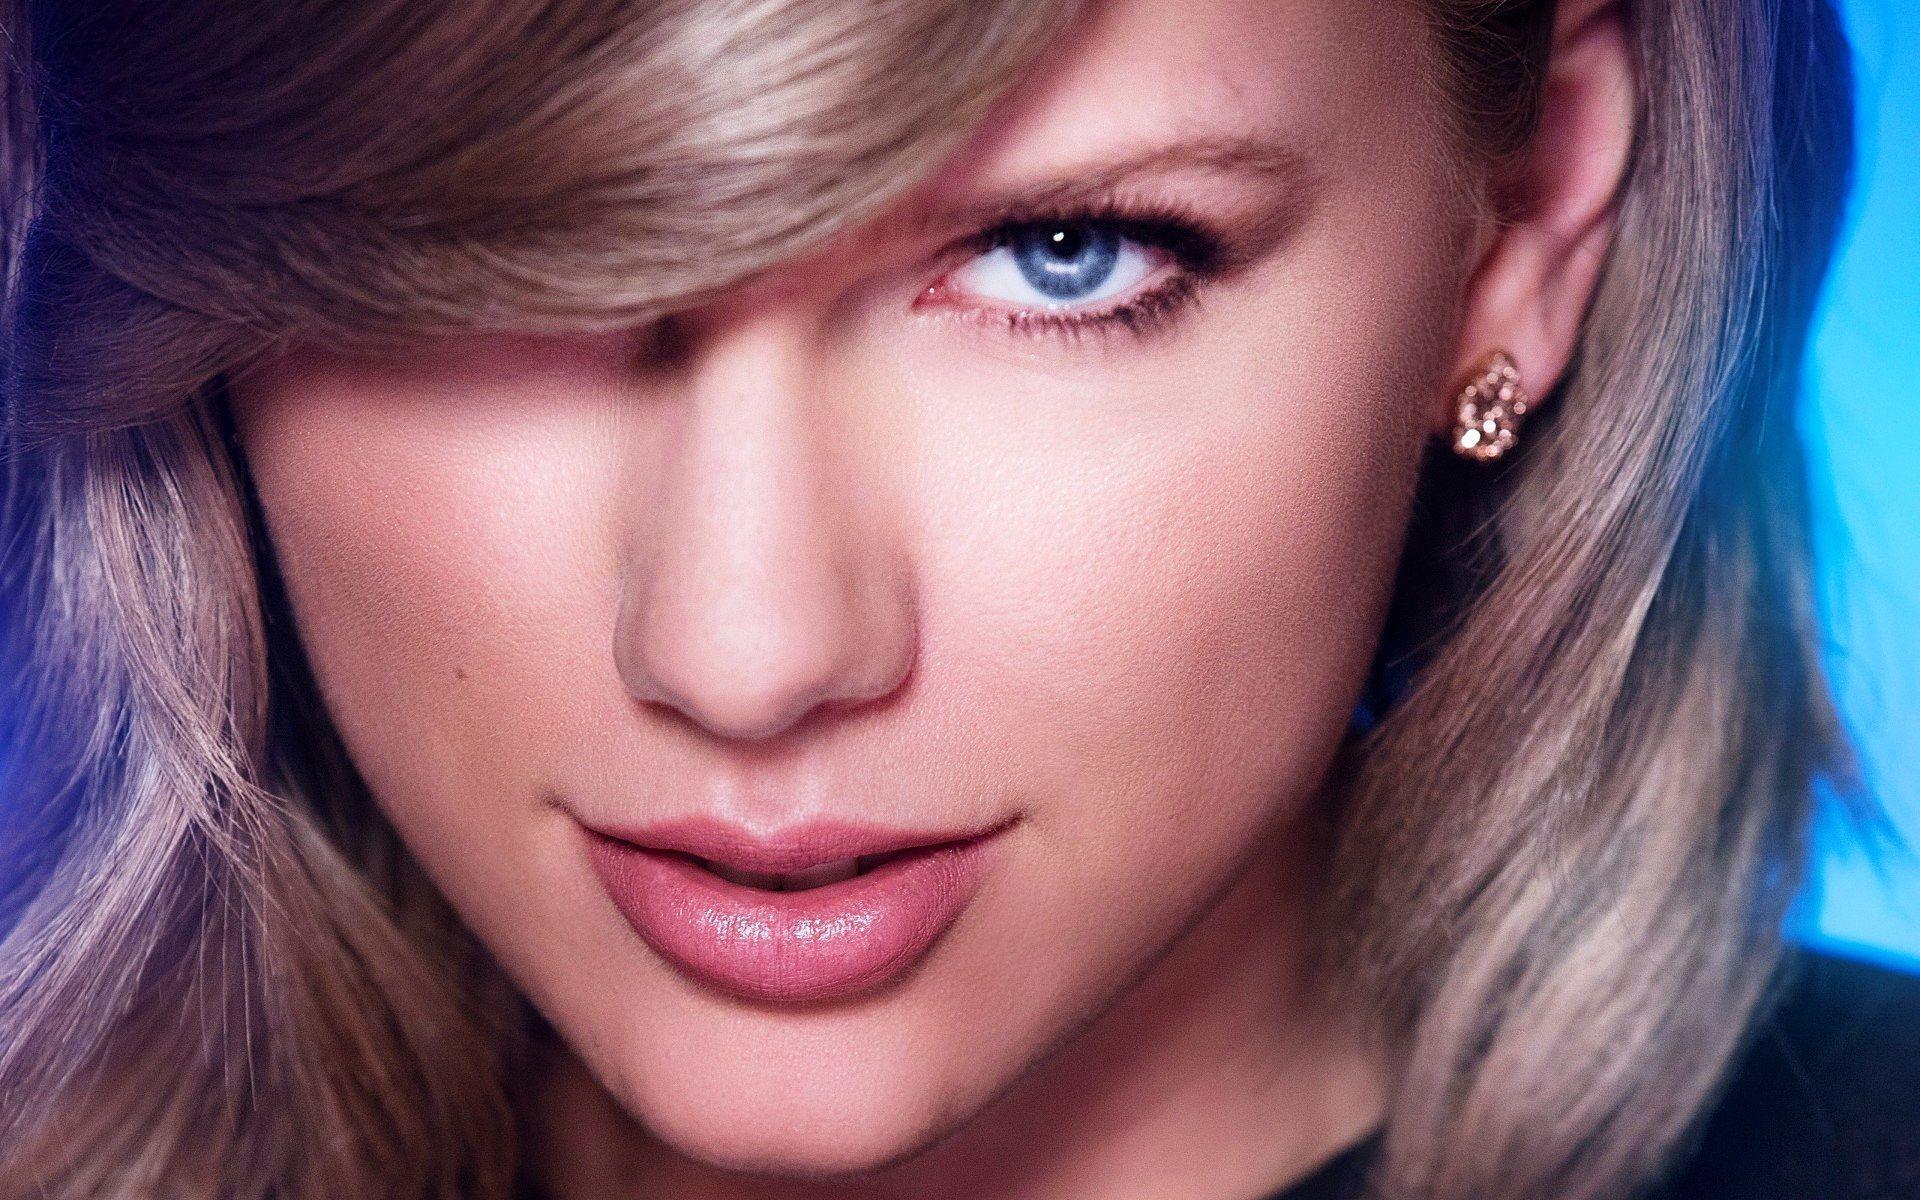 Taylor Swift Face Wallpapers Top Free Taylor Swift Face Backgrounds